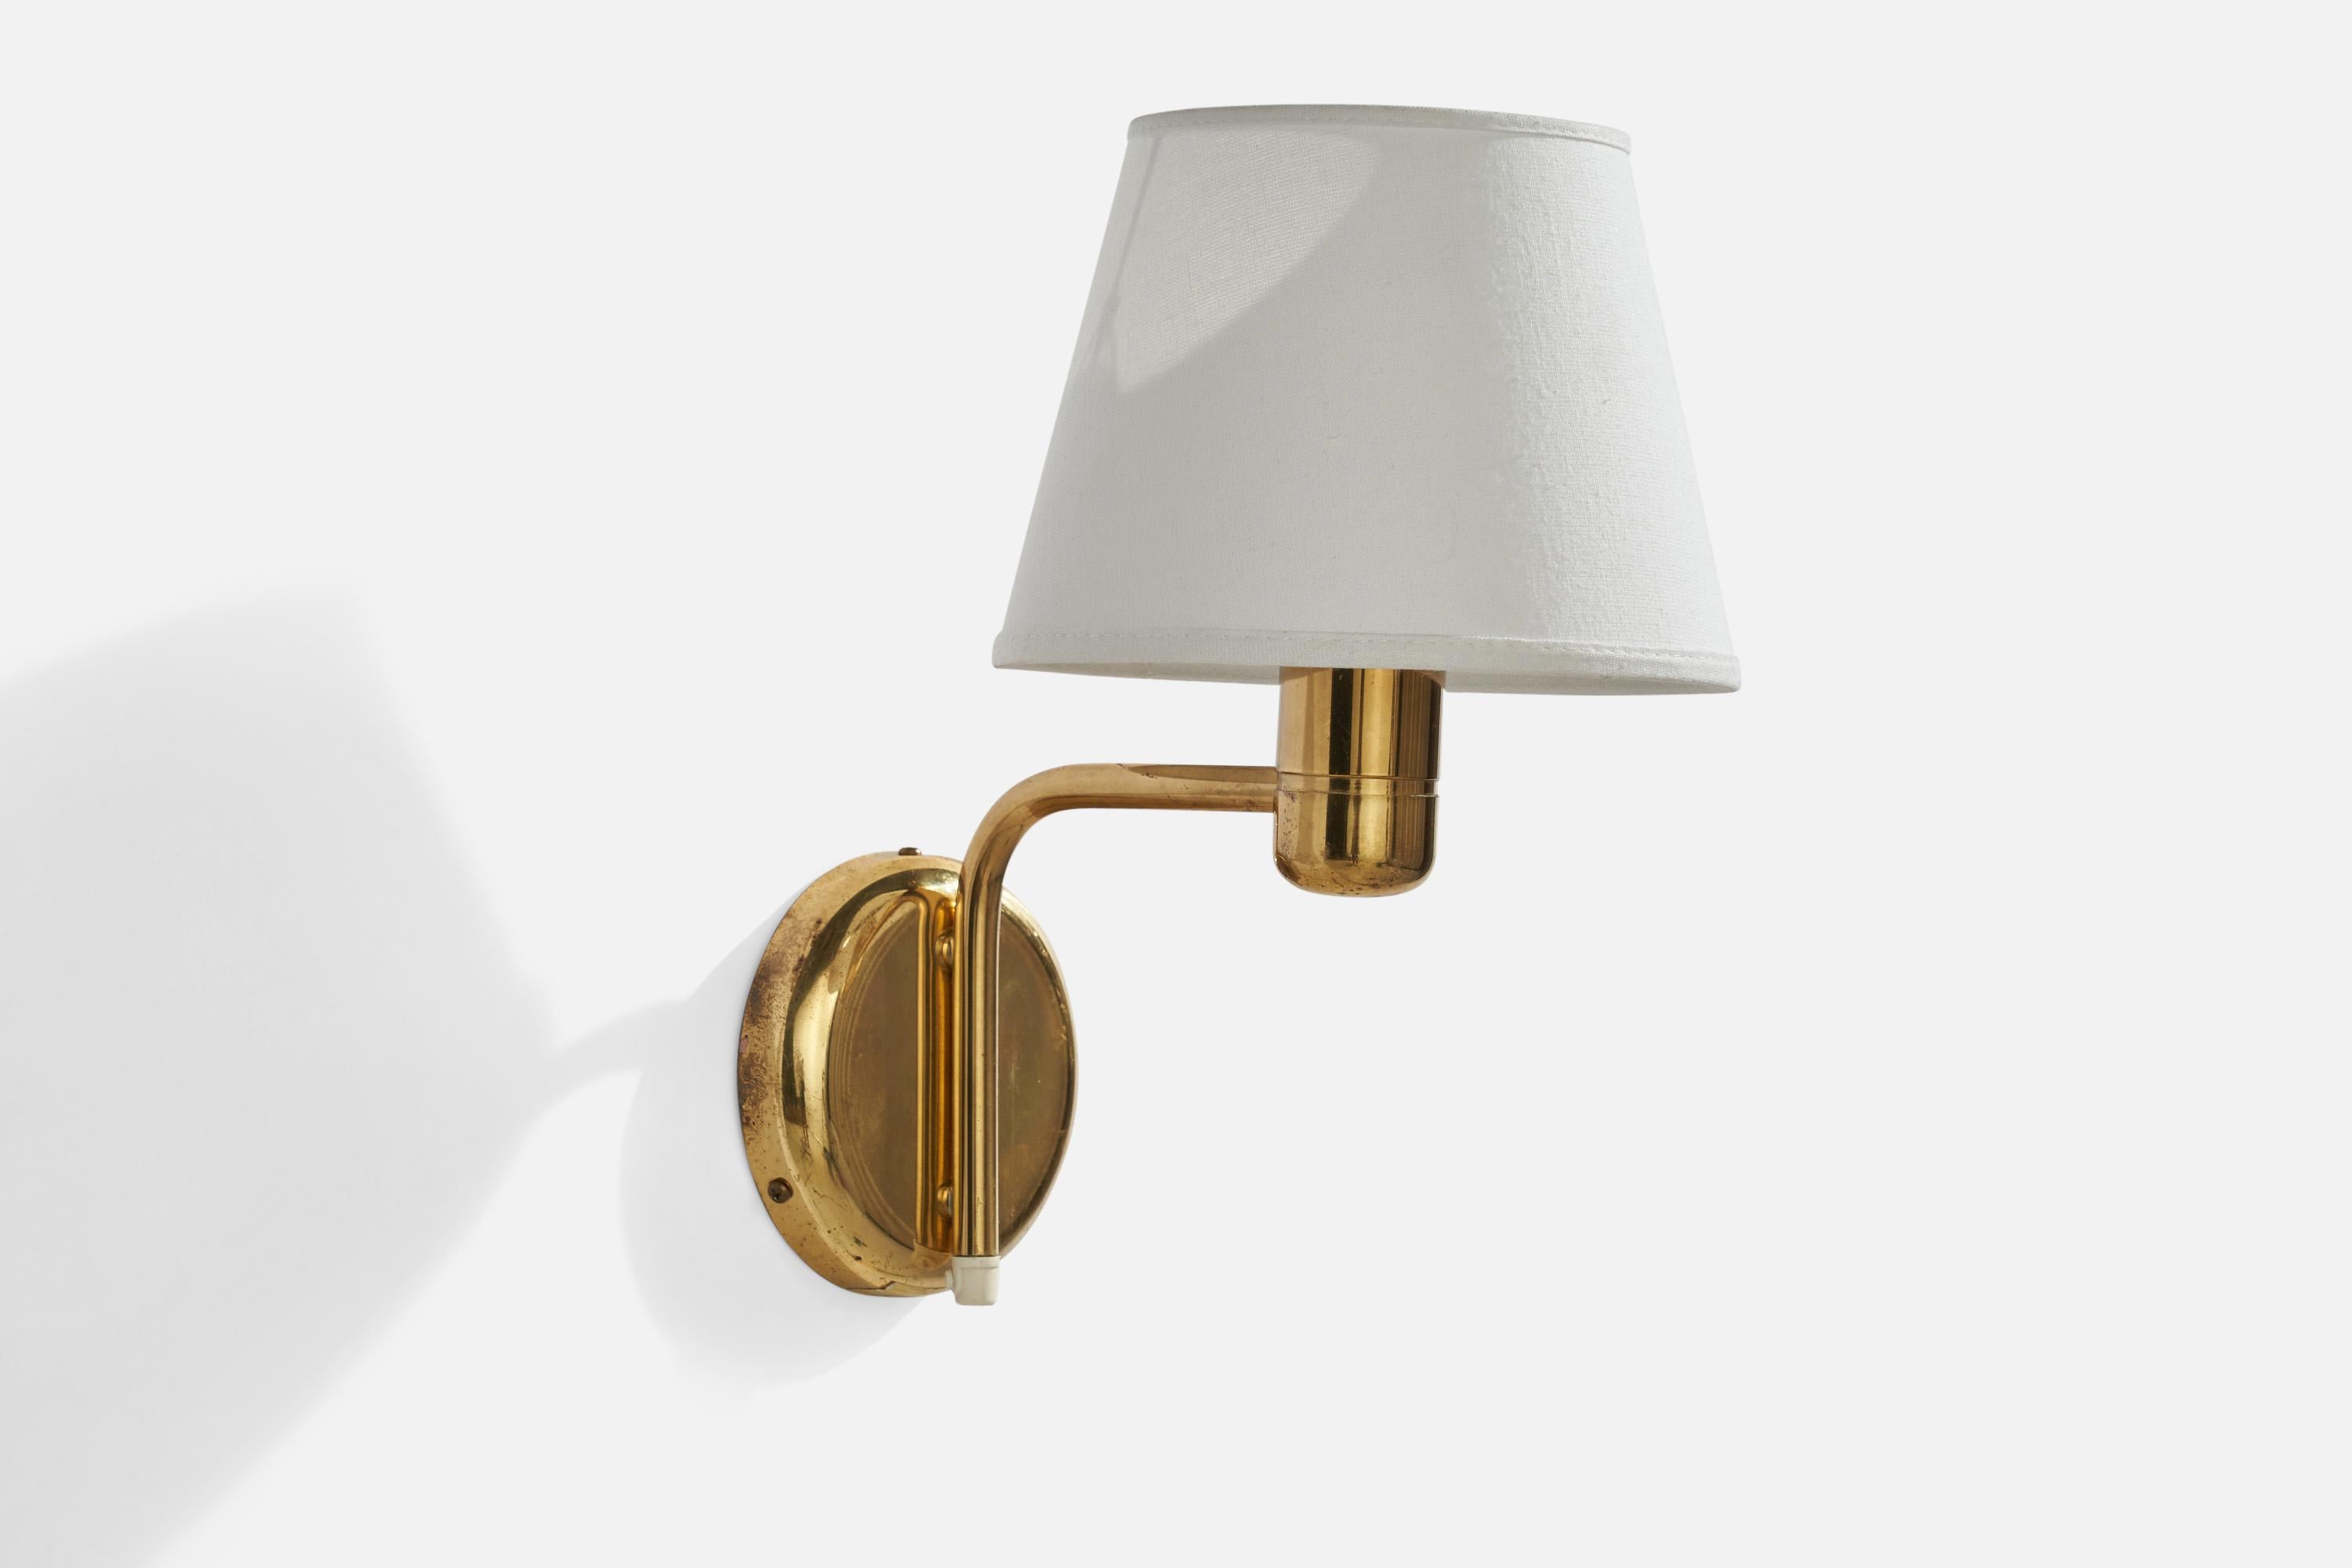 A brass and white fabric wall light designed and produced by Örsjö Industri, Sweden, c. 1970s.

Overall Dimensions (inches): 13.5” H x 8” W x 11” D
Back Plate Dimensions (inches): 5”  H x 5” W x 1” D
Bulb Specifications: E-26 Bulb
Number of Sockets: